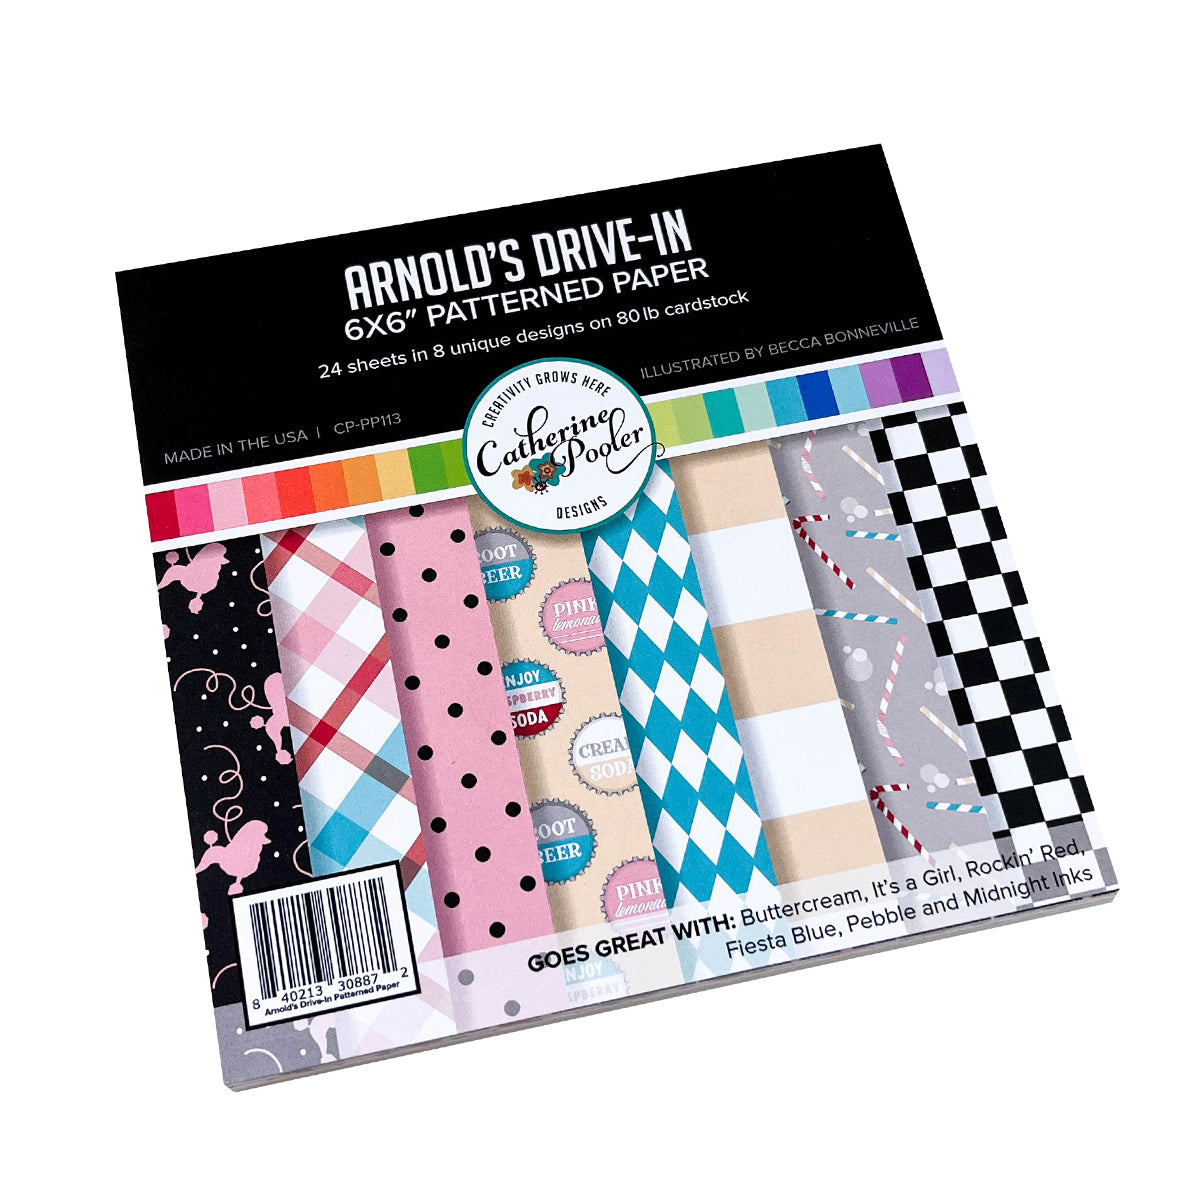 Arnold's Drive-In Patterned Paper 6x6 inch pack